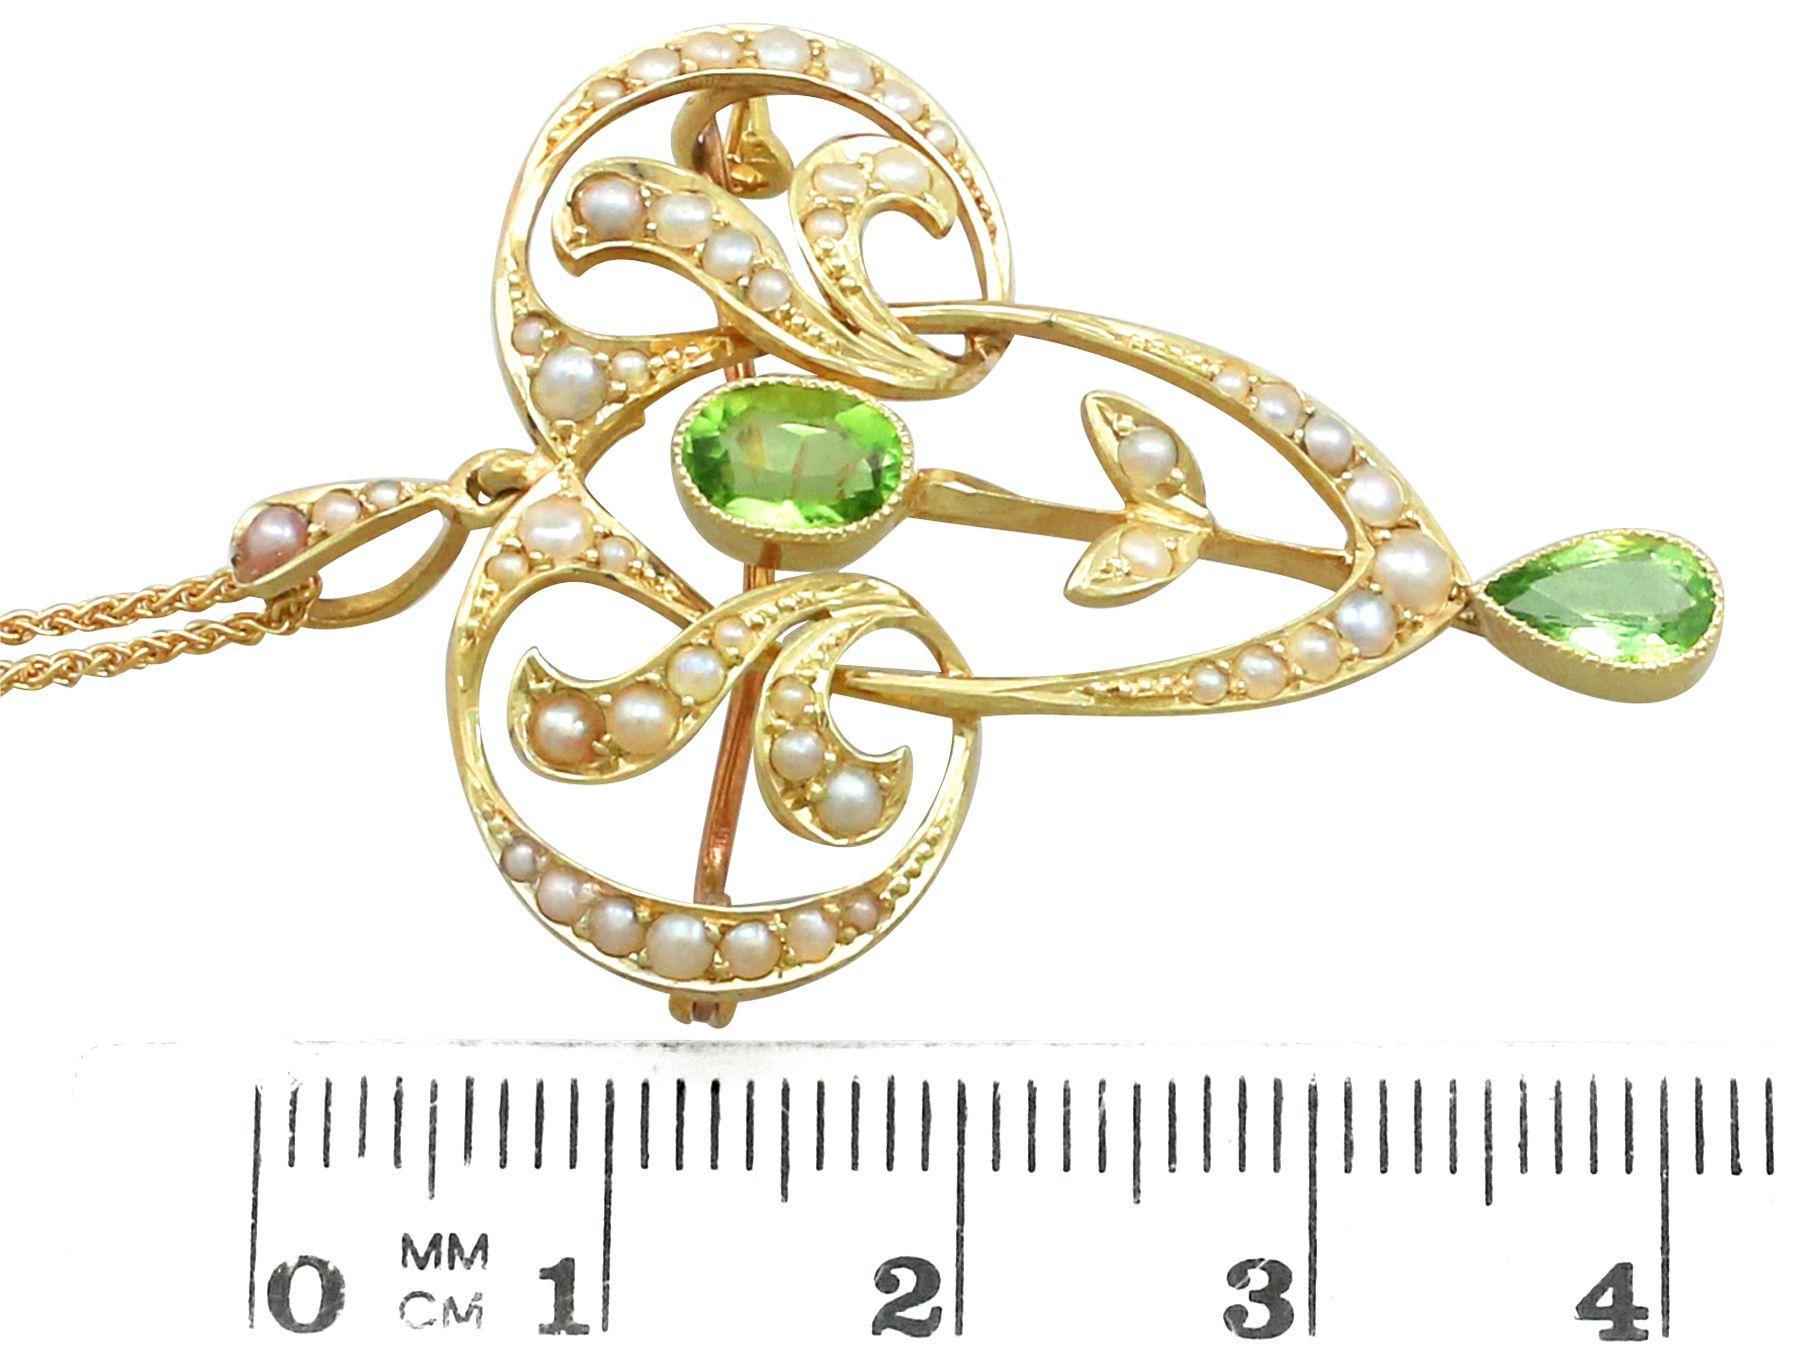 Women's or Men's Antique 1910s Art Nouveau Peridot and Seed Pearl Yellow Gold Pendant / Brooch For Sale